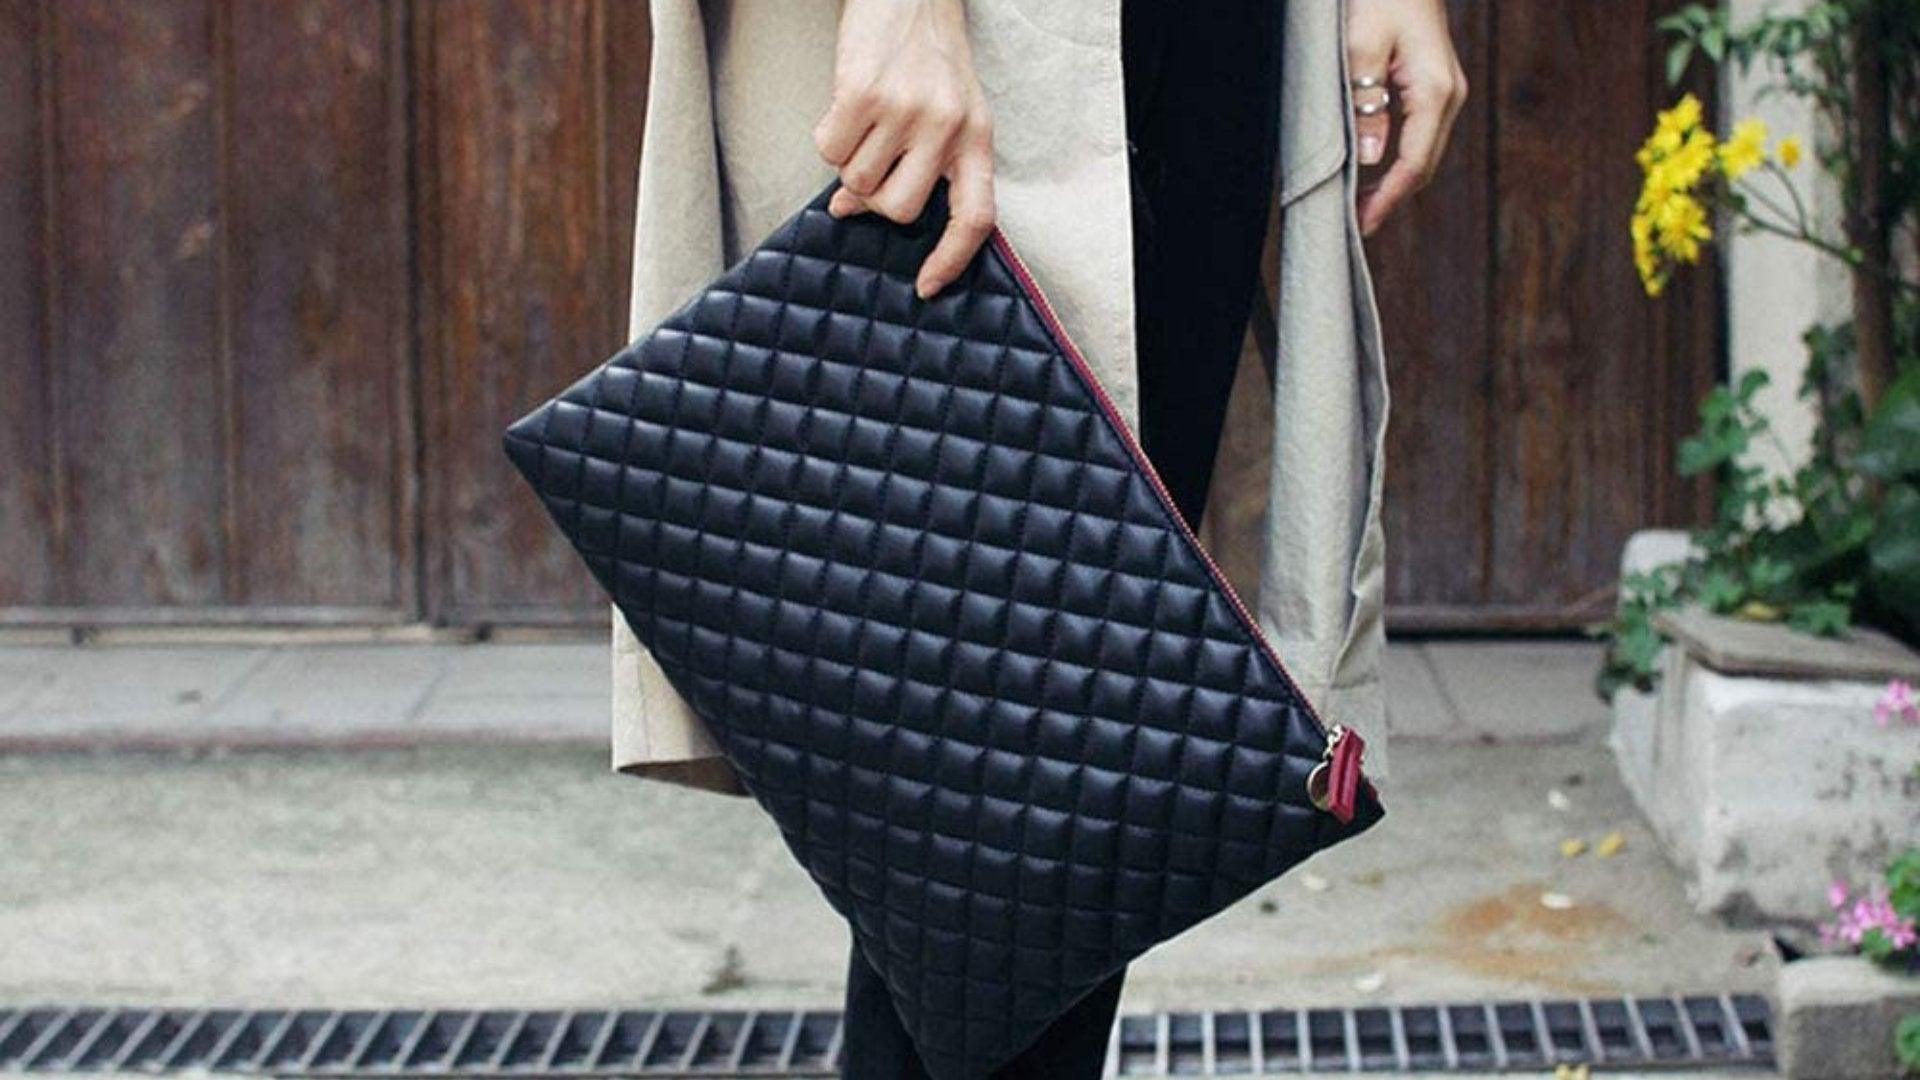 chanel evening clutch bags